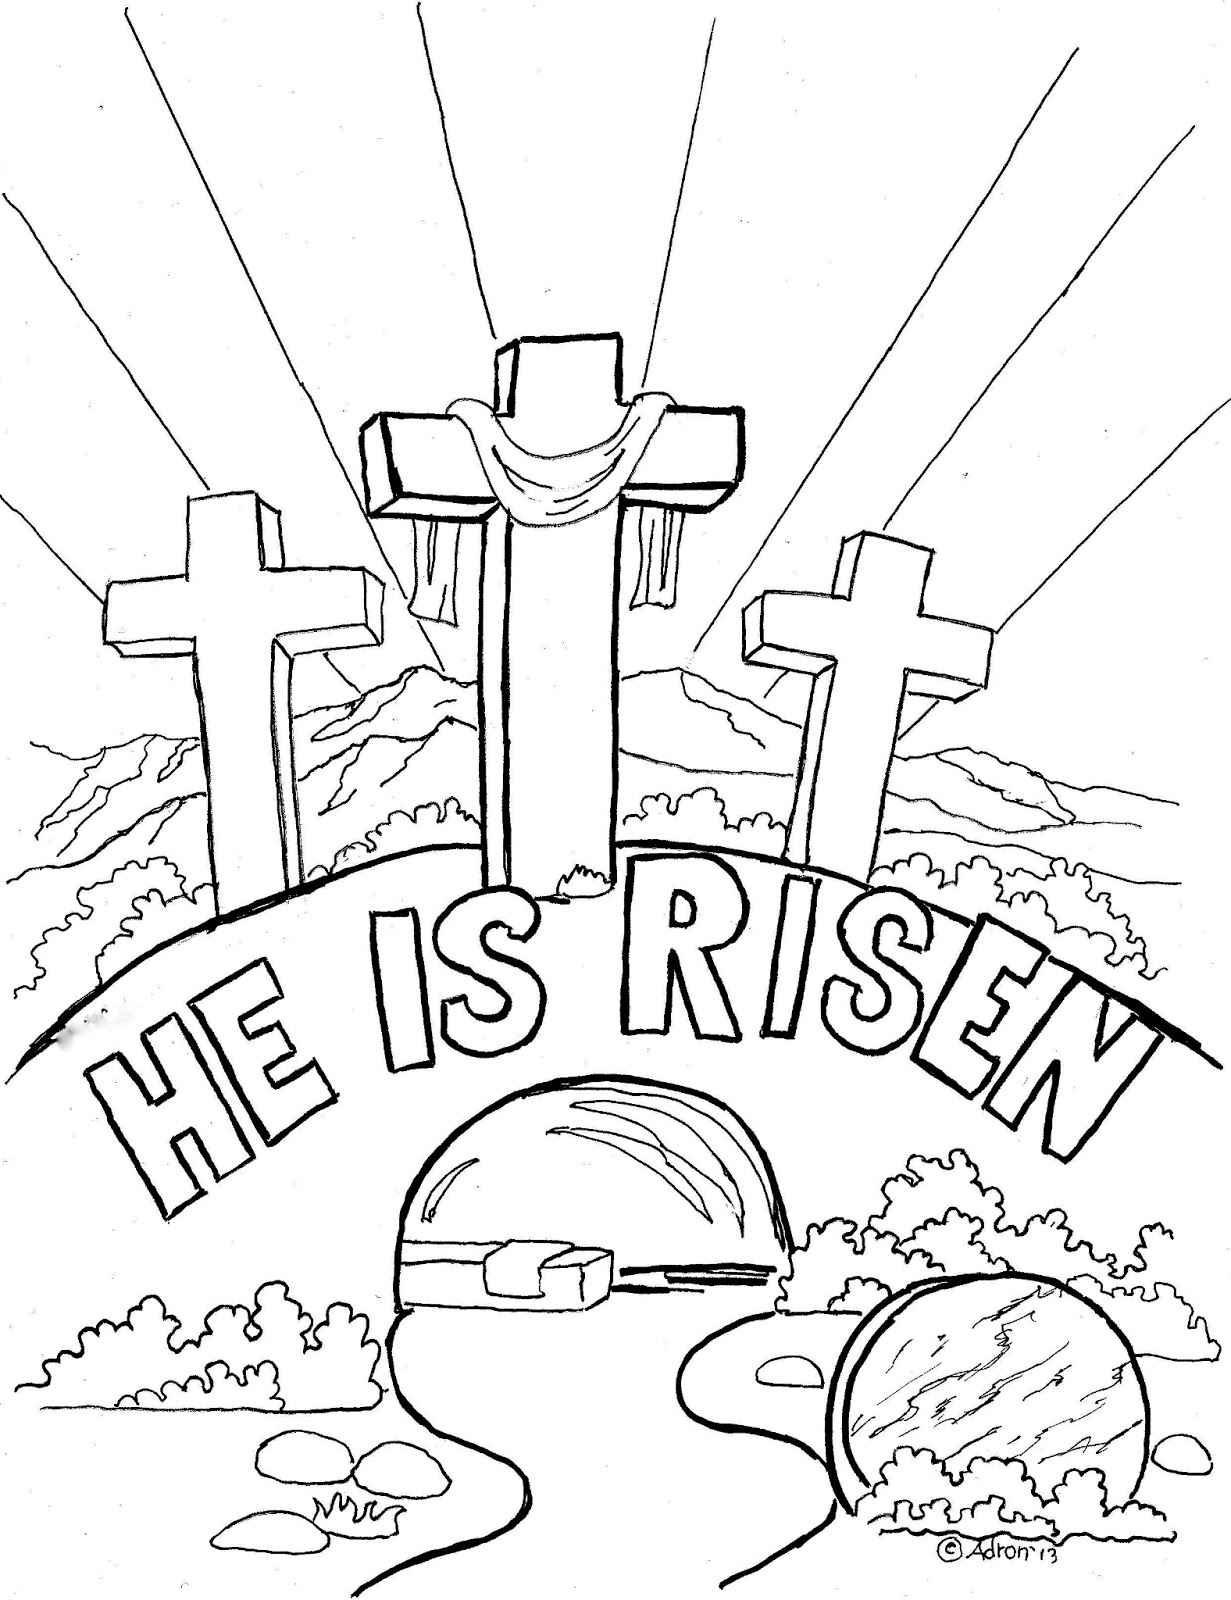 Download Religious Easter Coloring Pages - Best Coloring Pages For Kids